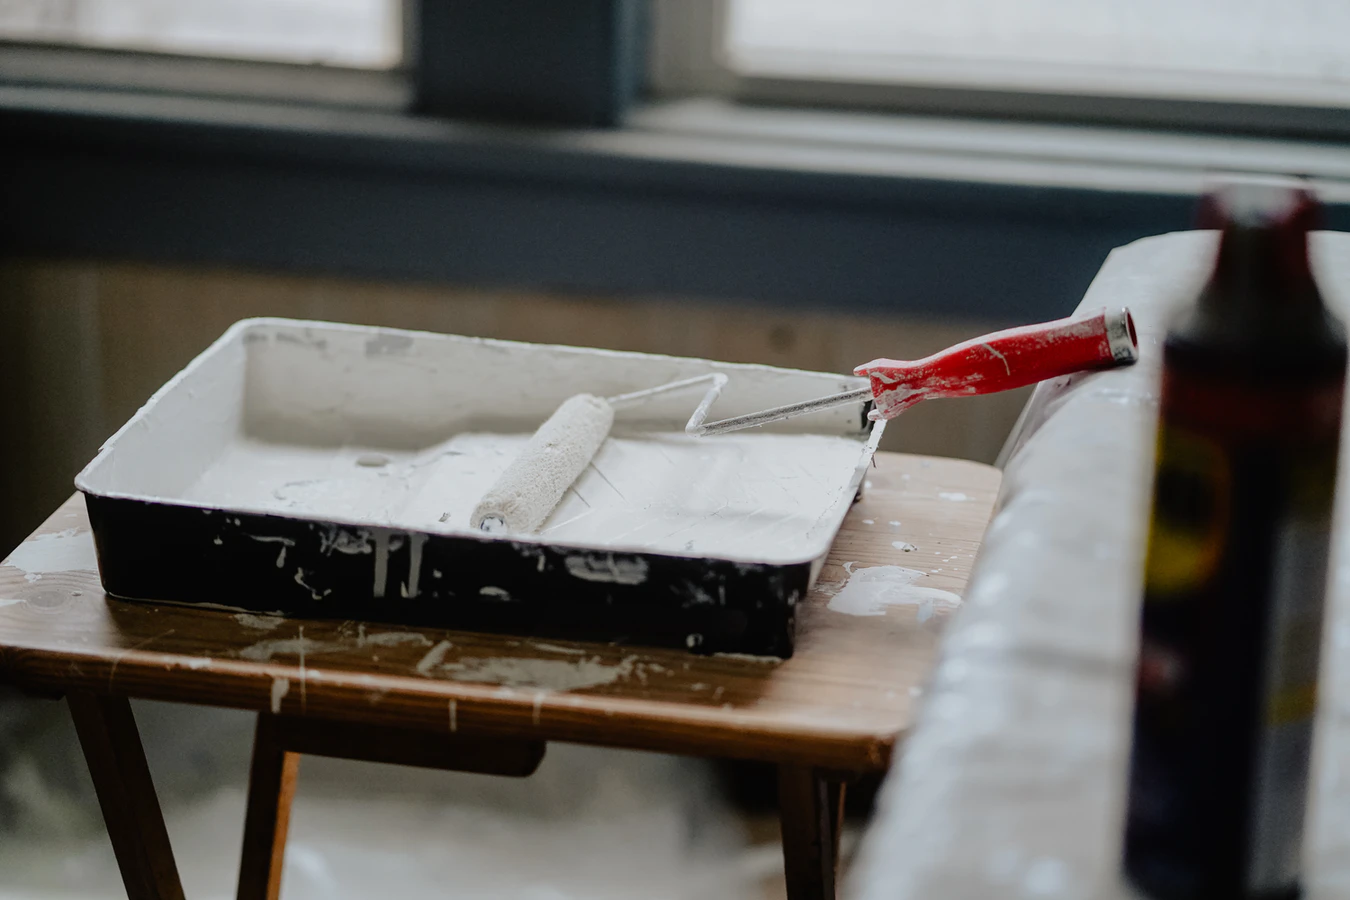 A bucket of white paint on a wooden table with a paint roller that has a red handle